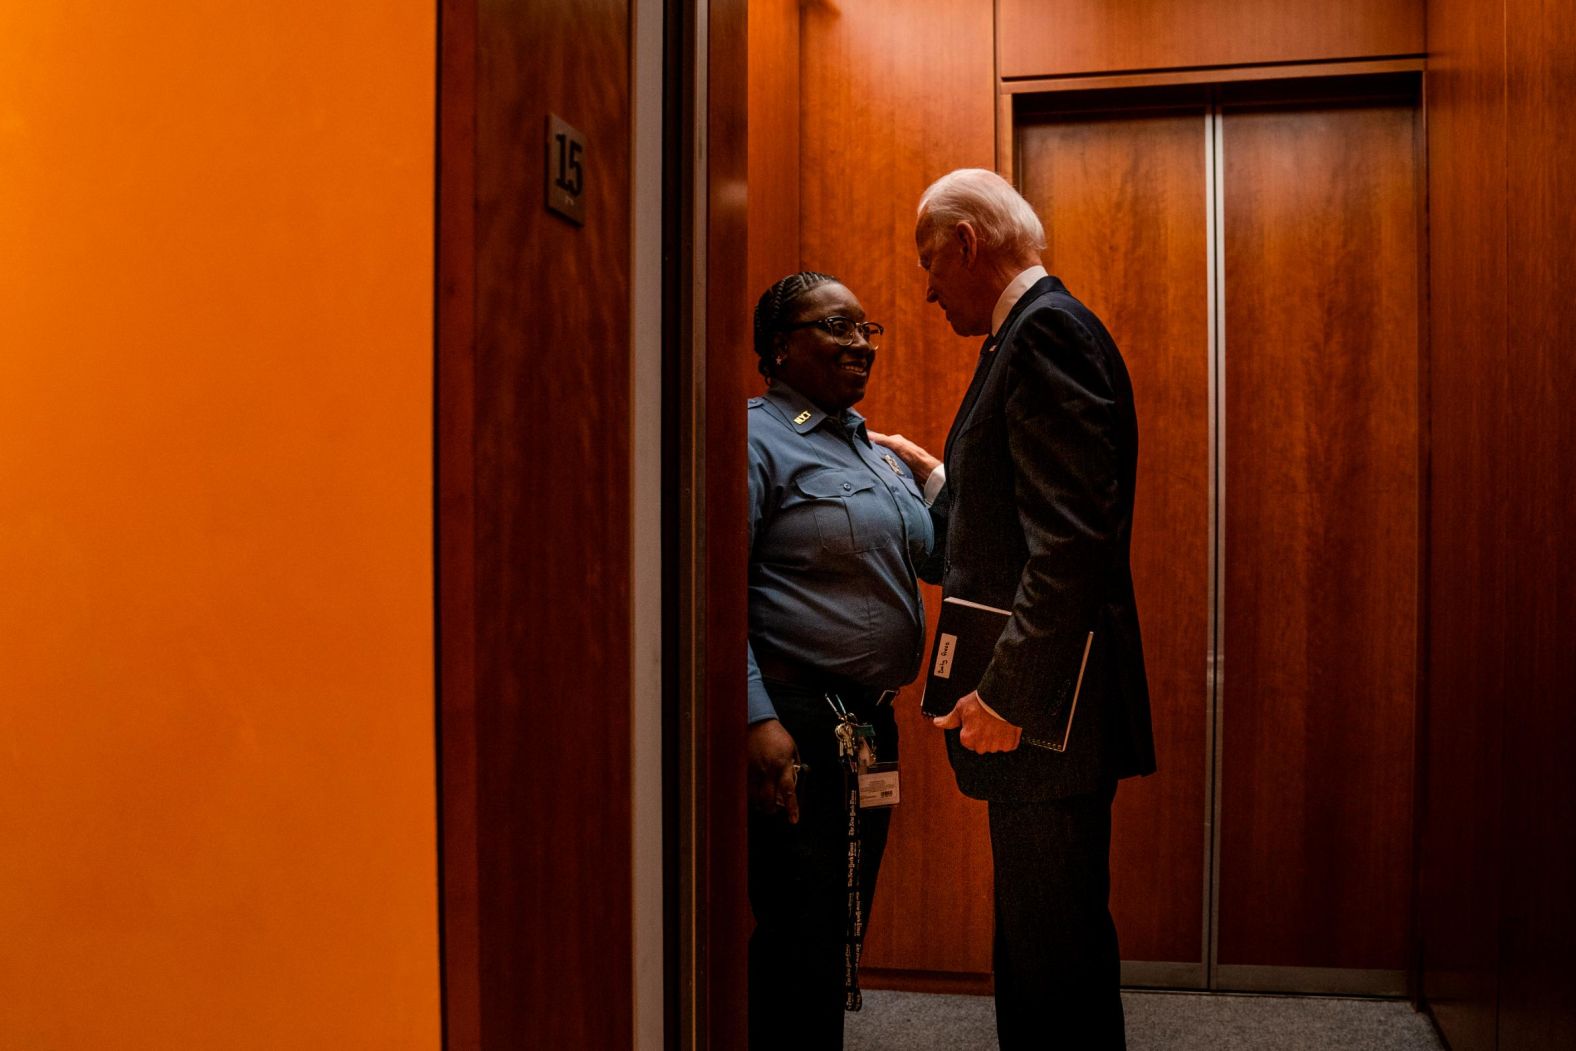 Biden speaks with Jacquelyn Brittany, a security guard at The New York Times, in December 2019. Brittany was escorting Biden to a Times editorial board meeting when she said: "I love you. I do. You're like my favorite." <a href="index.php?page=&url=https%3A%2F%2Fwww.cnn.com%2Fvideos%2Fpolitics%2F2020%2F01%2F21%2Fjoe-biden-elevator-selfie-new-york-times-endorsement-orig-llr.cnn" target="_blank">The exchange</a> was aired as part of the Times' TV series "The Weekly," and was circulated on social media. In August 2020, <a href="index.php?page=&url=https%3A%2F%2Fwww.cnn.com%2F2020%2F08%2F18%2Fpolitics%2Fsecurity-guard-elevator-biden-convention%2Findex.html" target="_blank">Brittany gave the first speech</a> officially nominating Biden for president at the Democratic National Convention. "I take powerful people up on my elevator all the time," Brittany said. "When they get off, they go to their important meetings. Me, I just head back to the lobby. But in the short time I spent with Joe Biden, I could tell he really saw me. That he actually cared, that my life meant something to him. And I knew even when he went into his important meeting, he'd take my story in there with him." Biden <a href="index.php?page=&url=https%3A%2F%2Ftwitter.com%2FJoeBiden%2Fstatus%2F1295900540694433792" target="_blank" target="_blank">responded on Twitter</a>: "Jacquelyn: Your nomination means the world to me. Thank you — and I hope you know: we love you back."